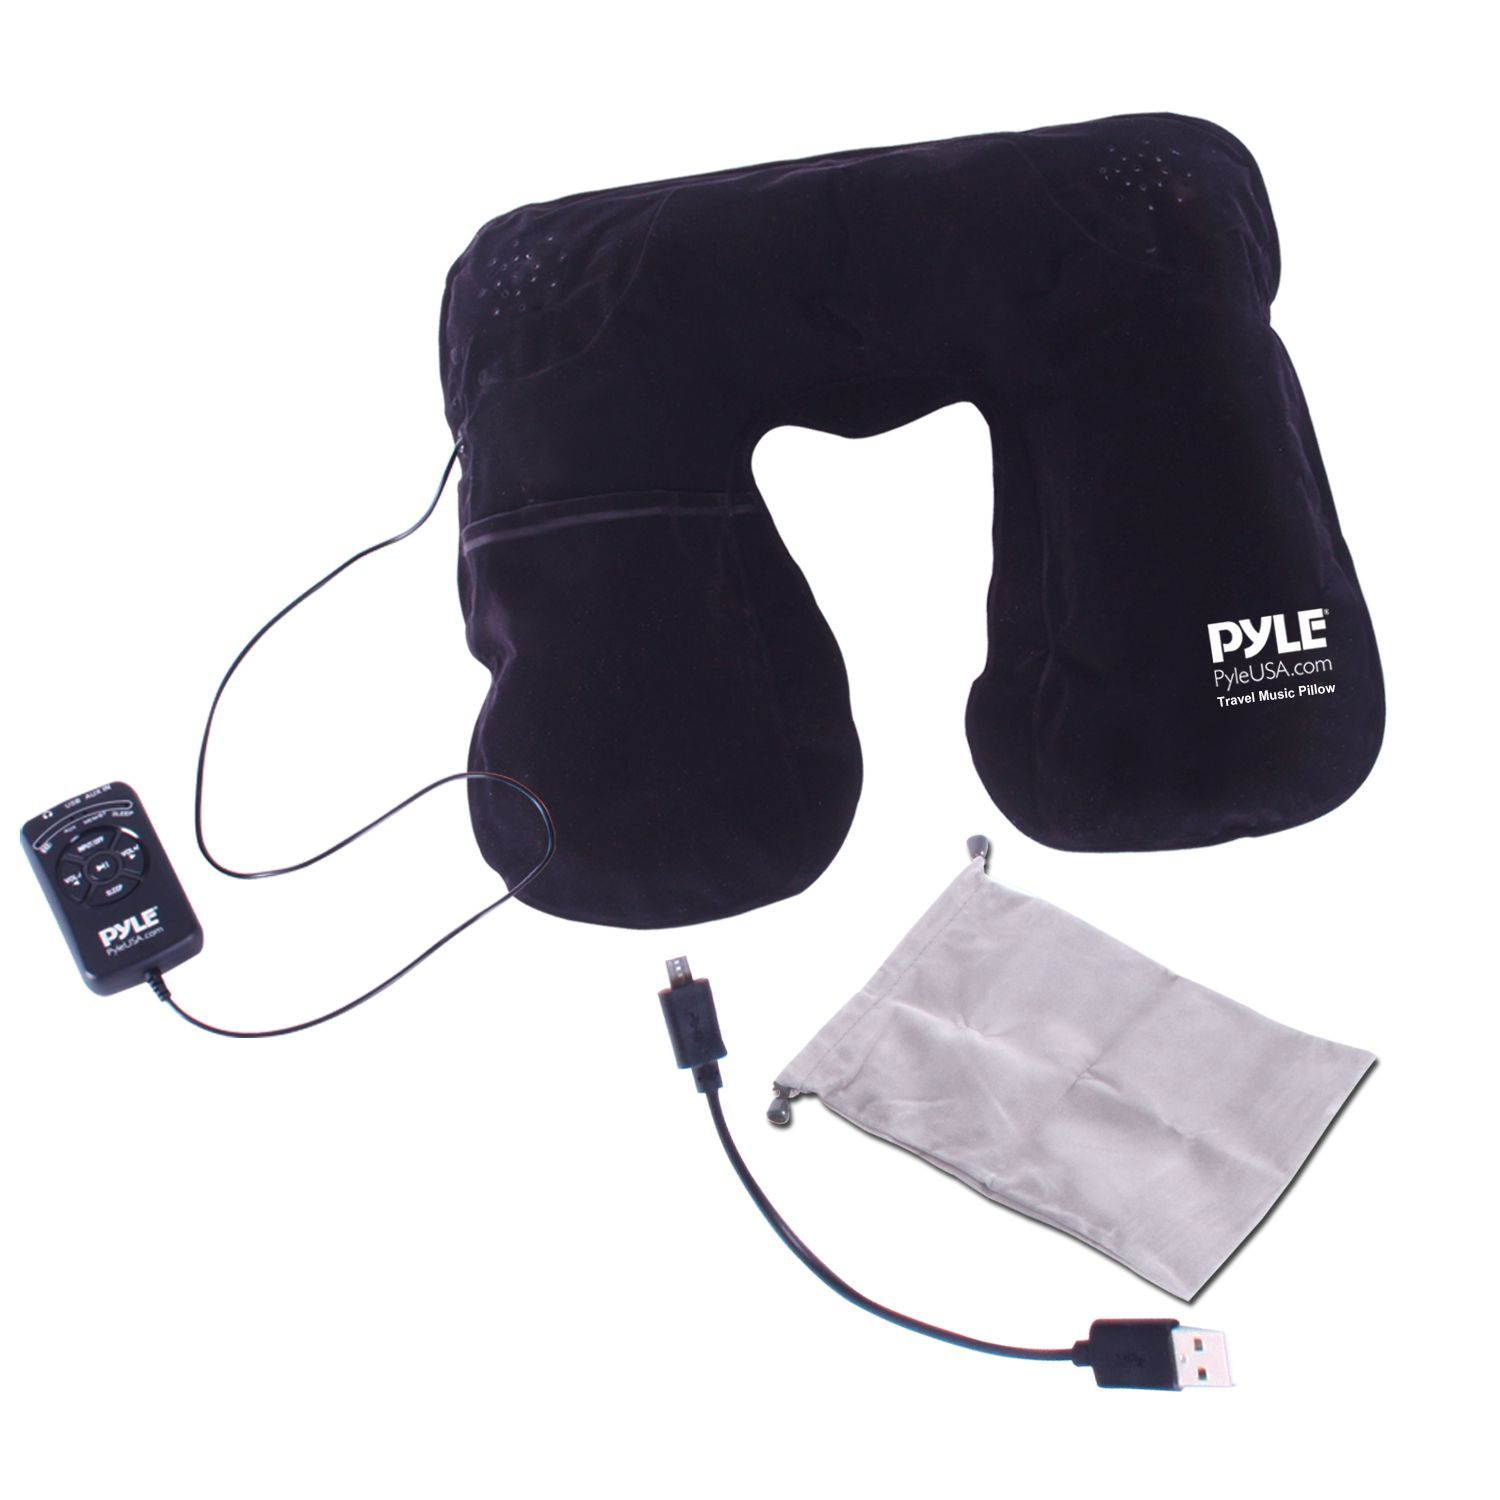 Pyle Bluetooth Audio Neck Pillow, Rechargeable Battery, Dual Speakers, (PITS18)